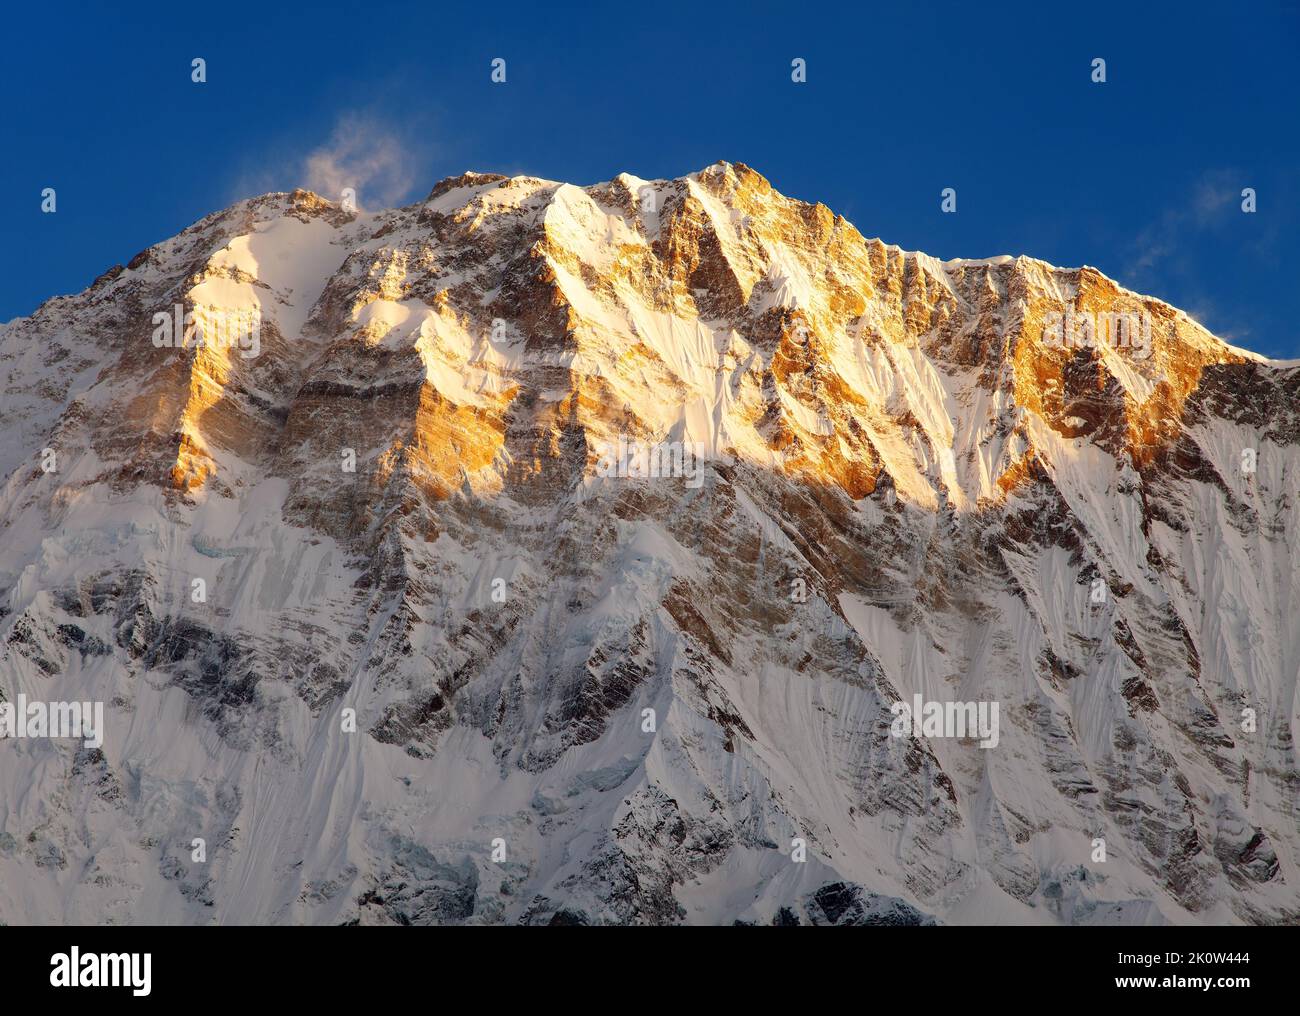 Morning view of Mount Annapurna from Annapurna south base camp, Nepal Stock Photo